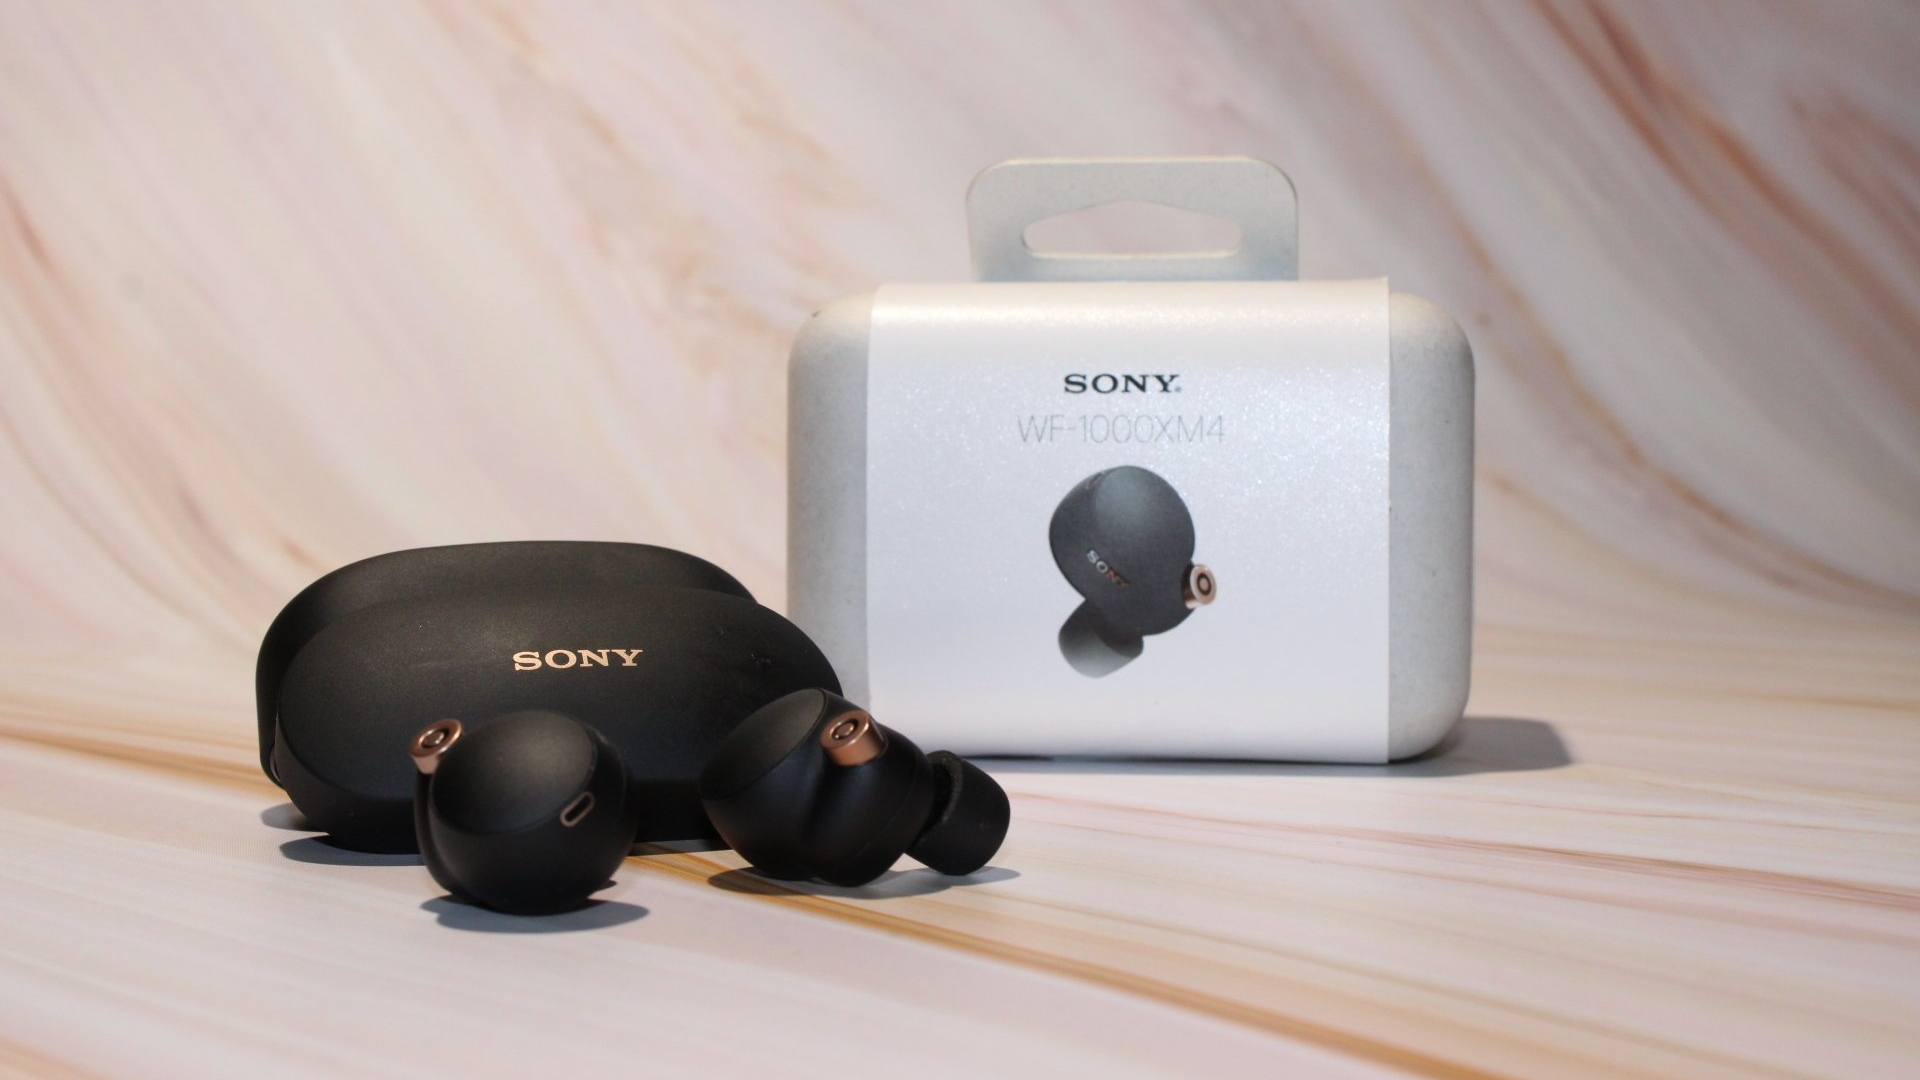 The Sony WF-1000XM4 outside the case, with the packaging